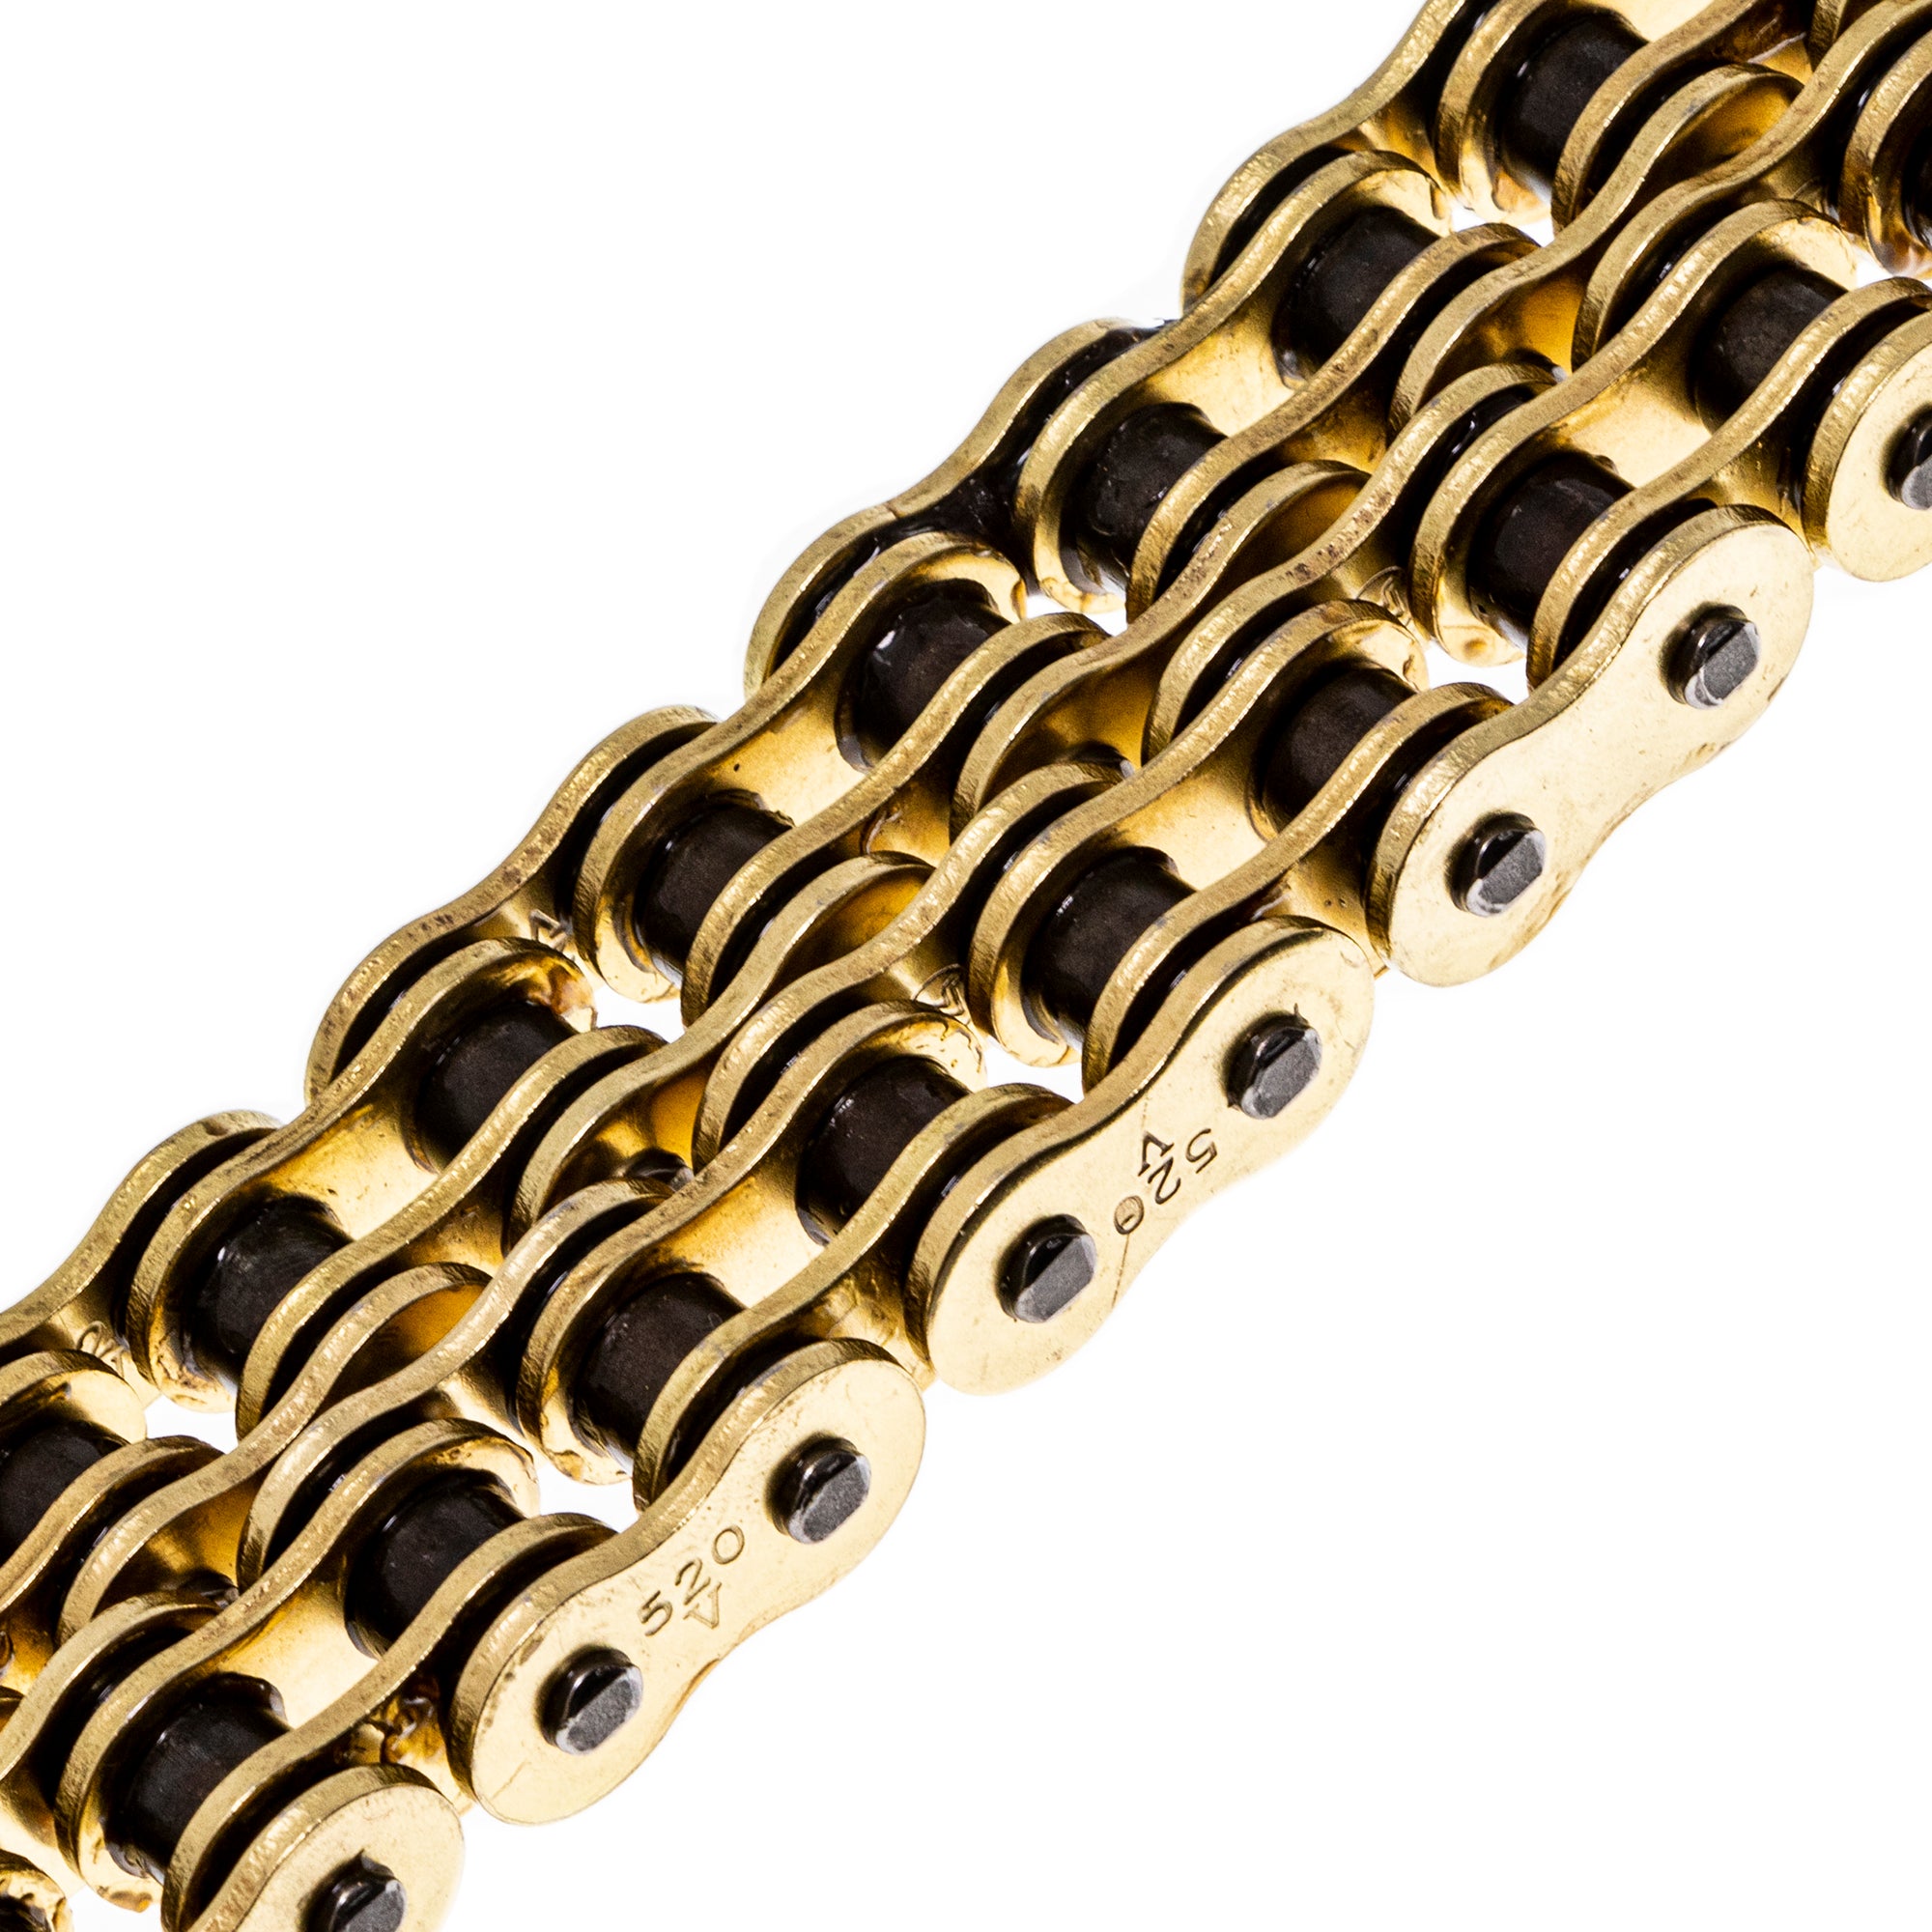 Gold X-Ring Chain 82 w/ Master Link for zOTHER Polaris Xplorer Trail ATC185S 3221193-082 NICHE 519-CDC2588H